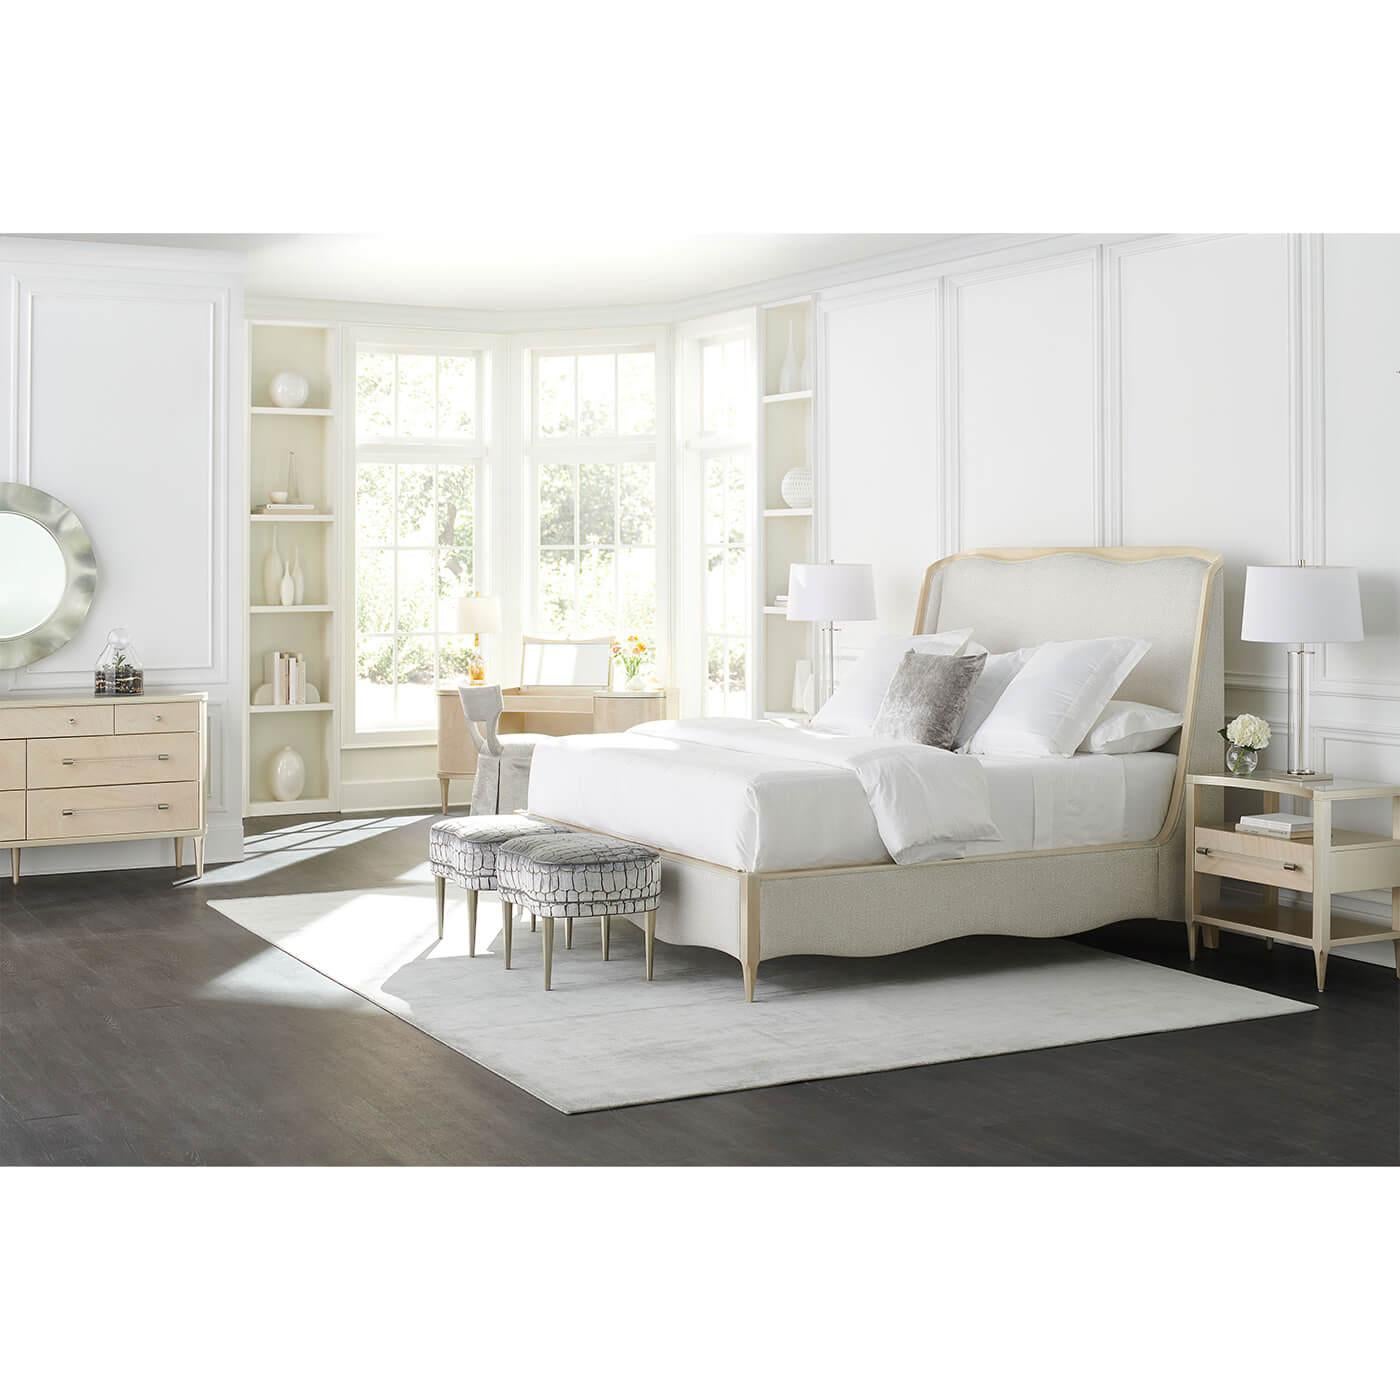 Modern Contemporary Pearl Finish King Bed For Sale